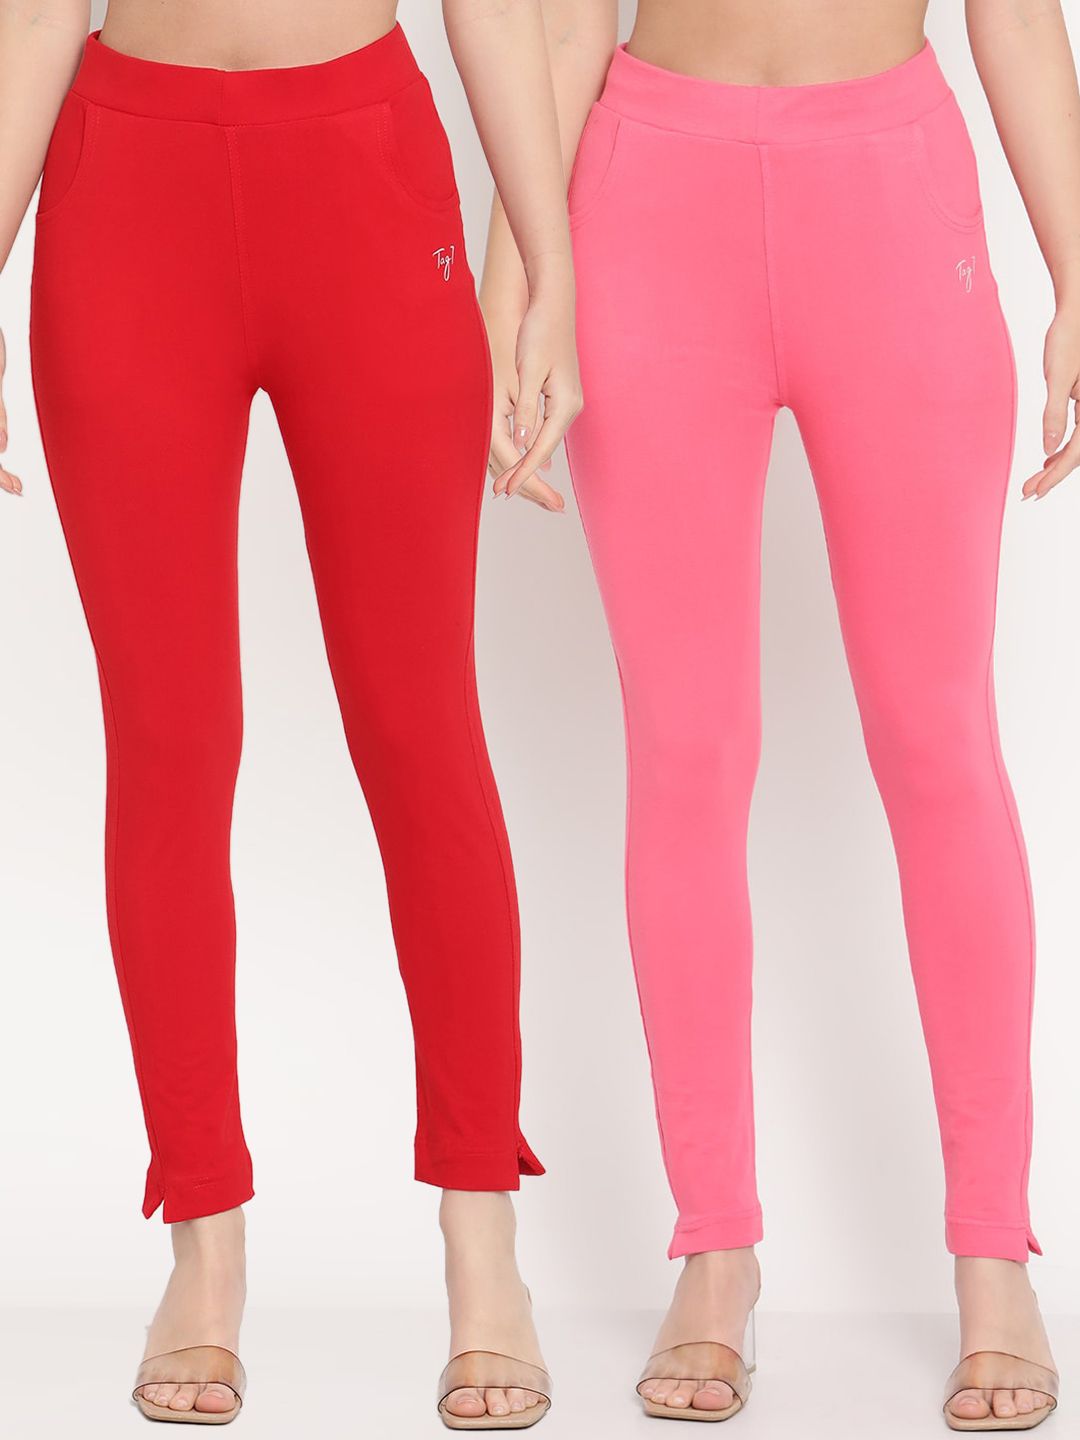 TAG 7 Women Set of 2 Pink & Red Ankle Length Leggings Price in India